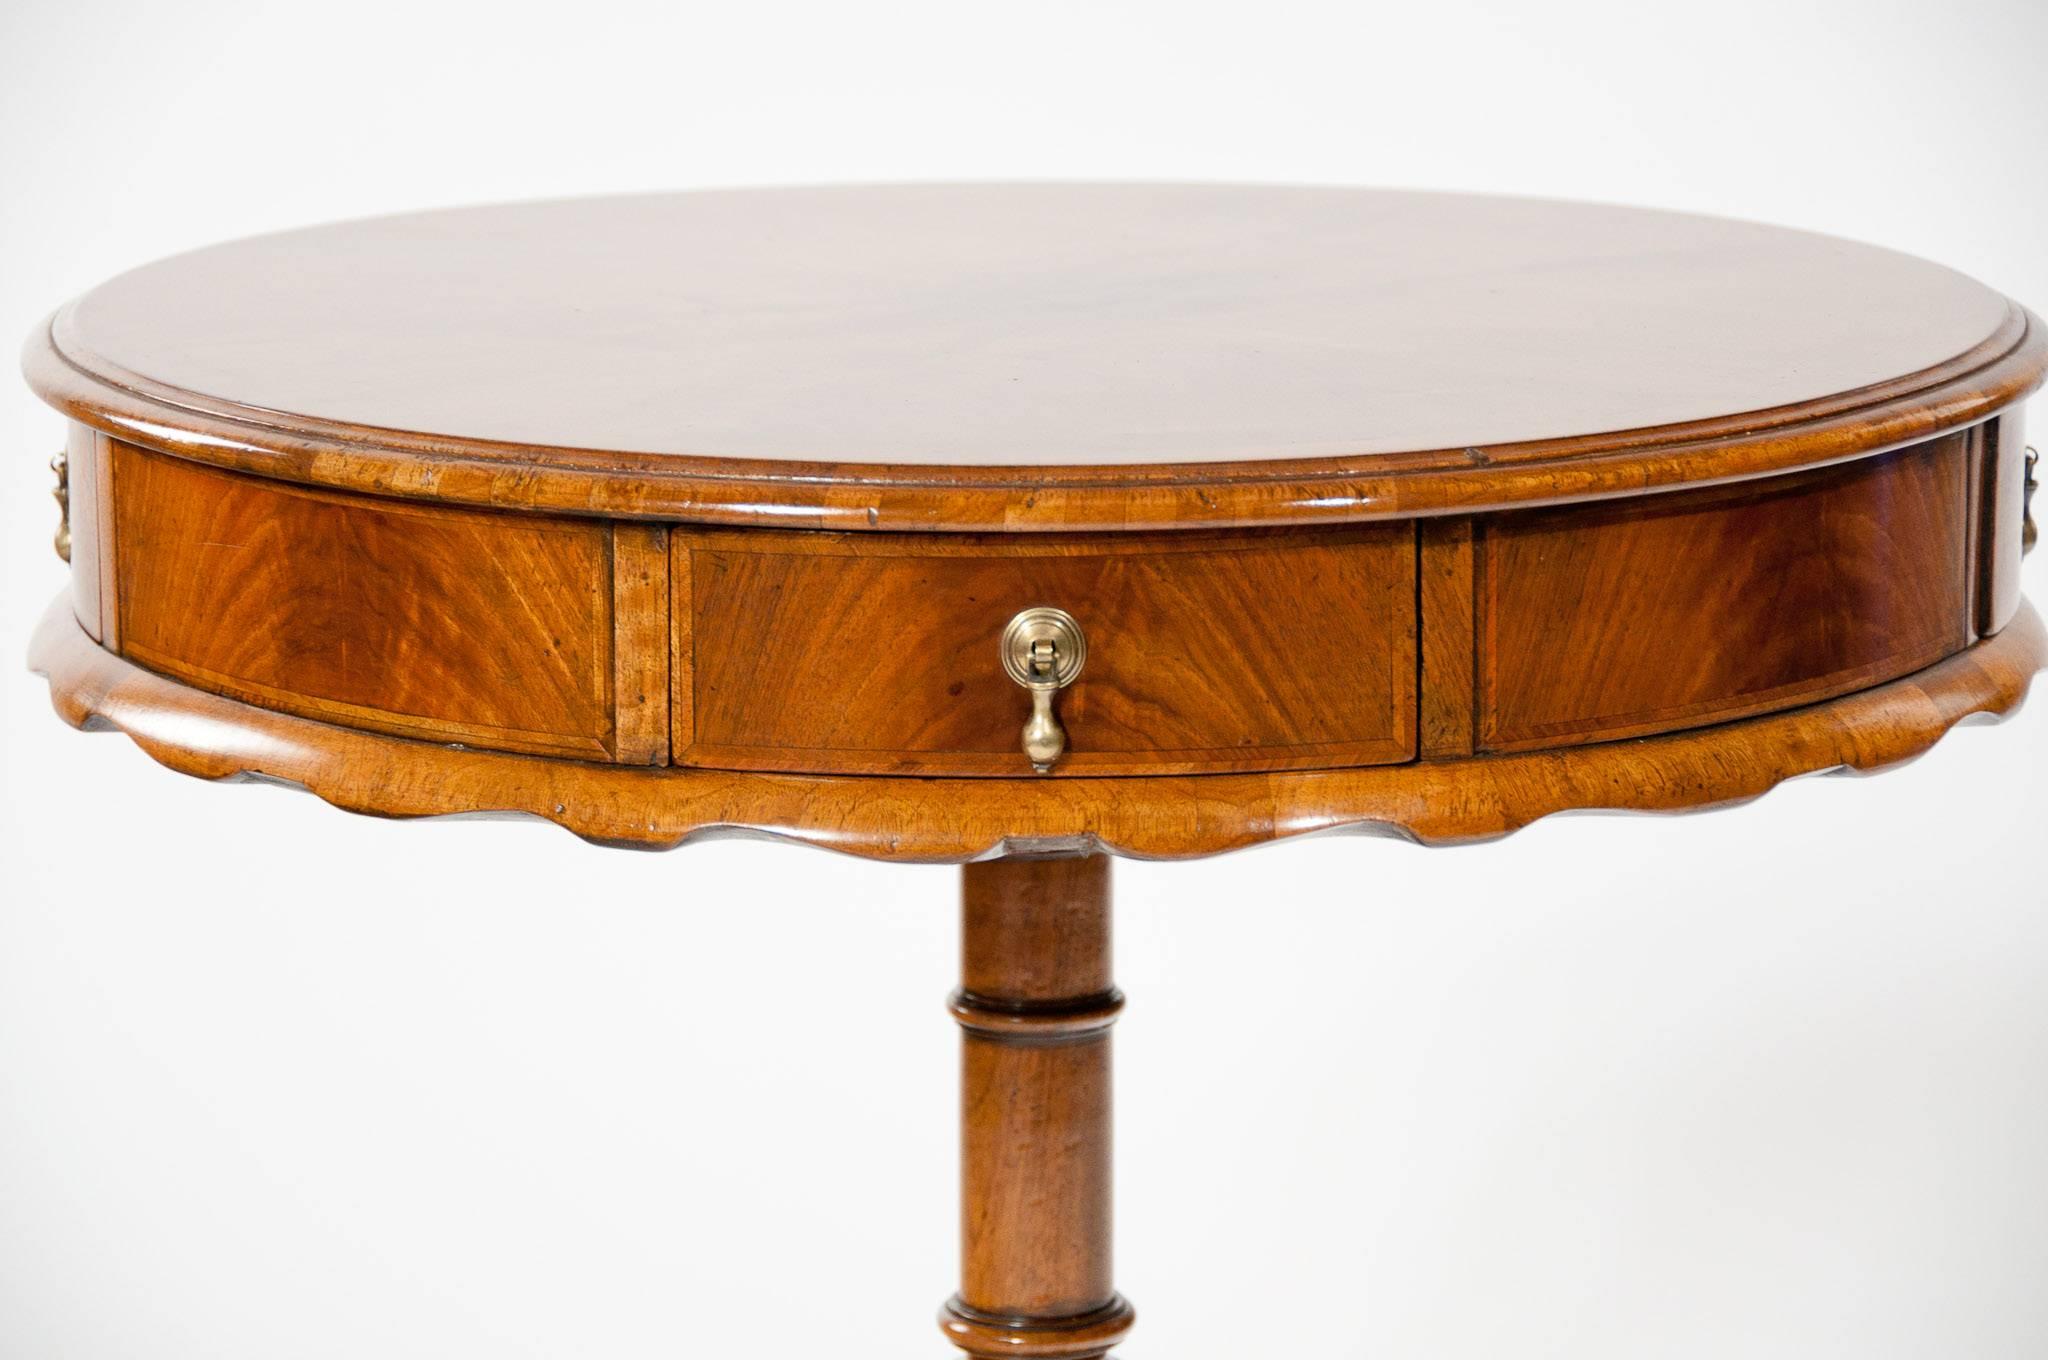 Polished Quality Antique Revolving Walnut Drum Table